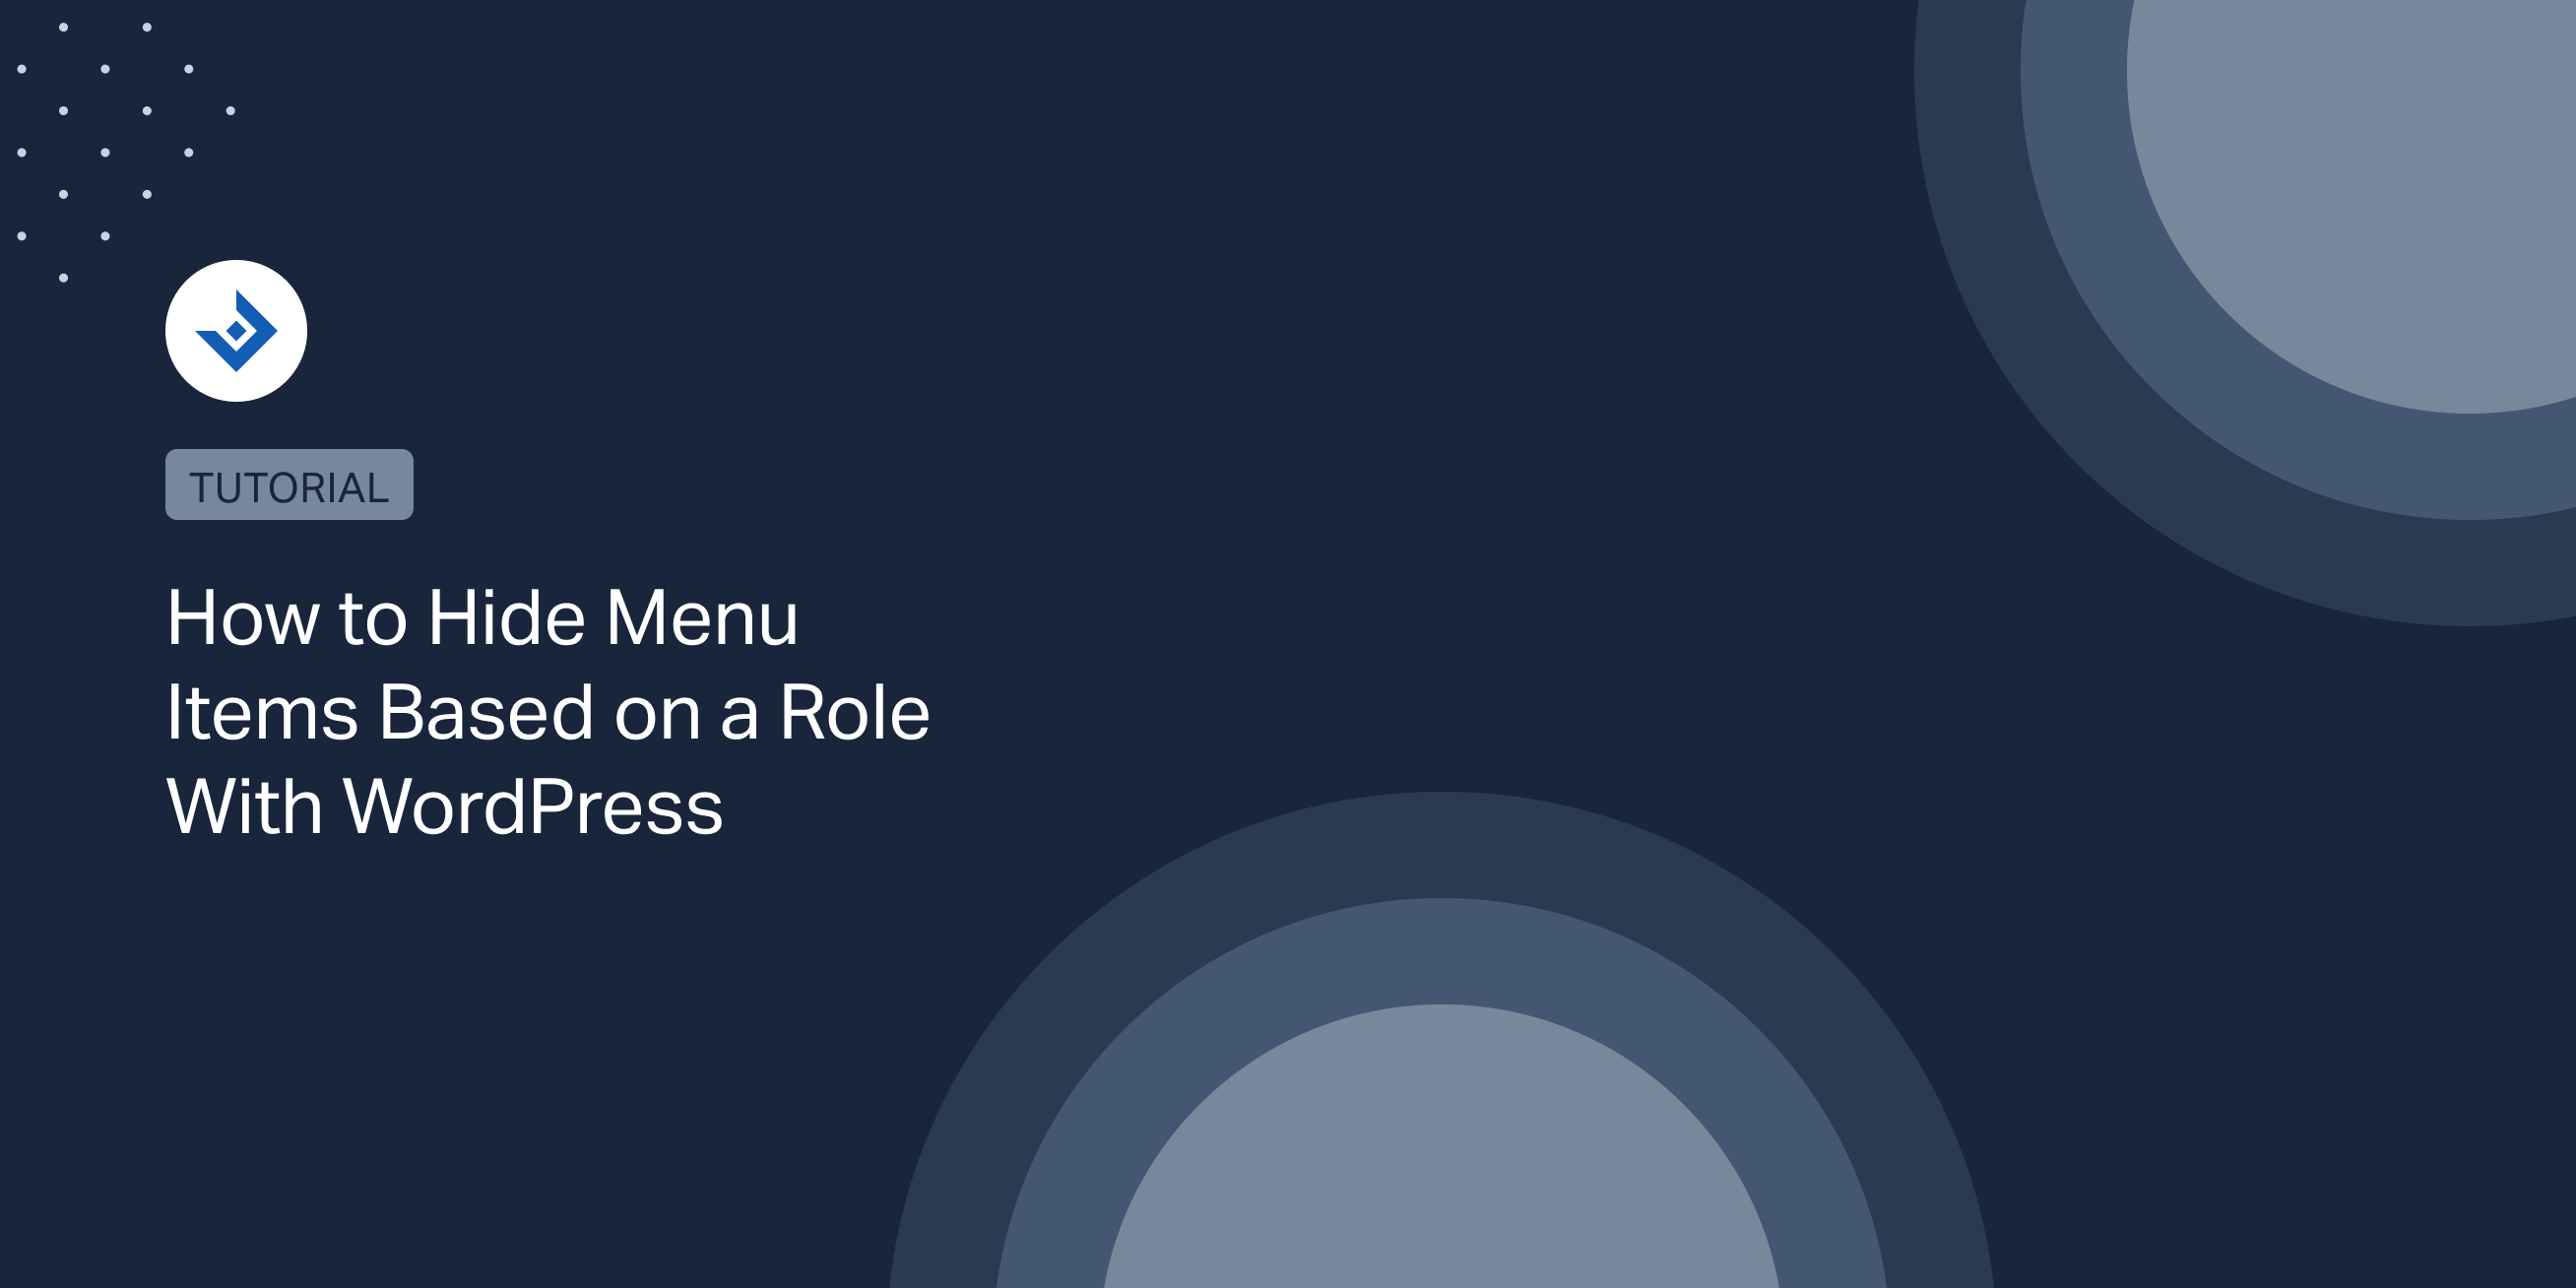 How to Hide Menu Items Based on a Role With WordPress